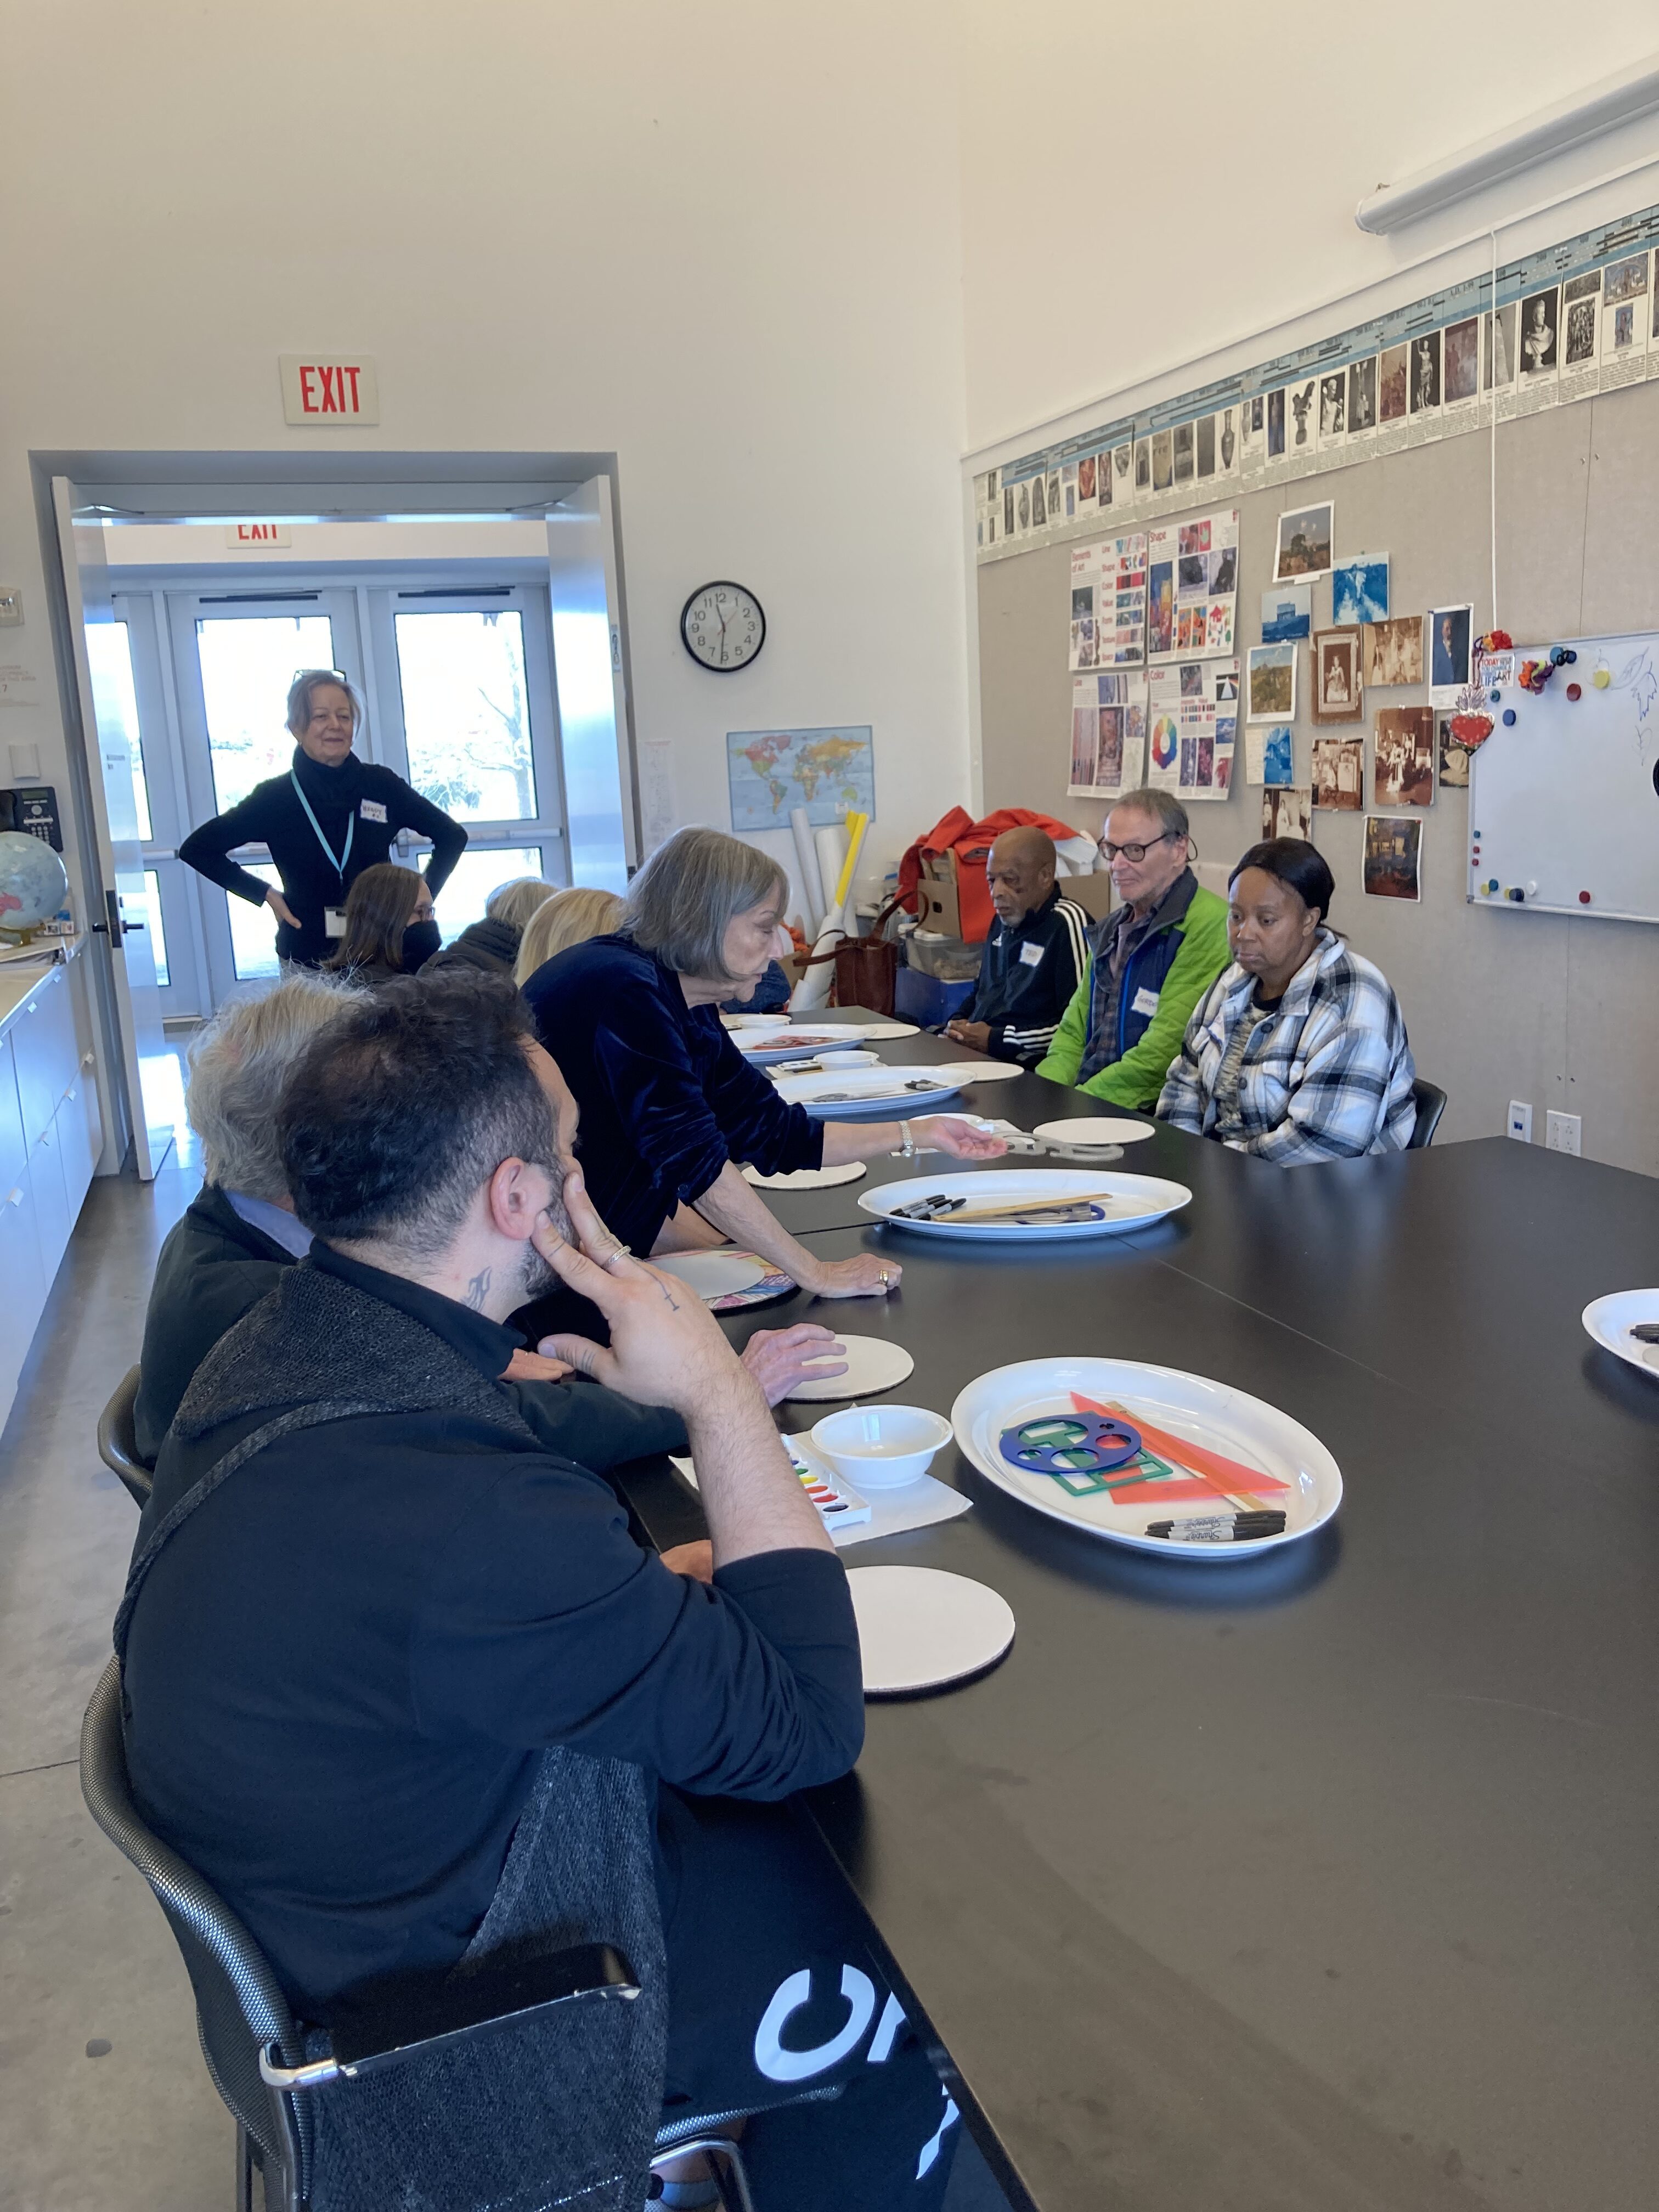 Scenes from a recent Paint at the Parrish class, an arts program designed specifically for individuals with Parkinson's Disease and their care partners. COURTESY CENTER FOR PARKINSON'S DISEASE, STONY BROOK, SOUTHAMPTON HOSPITAL